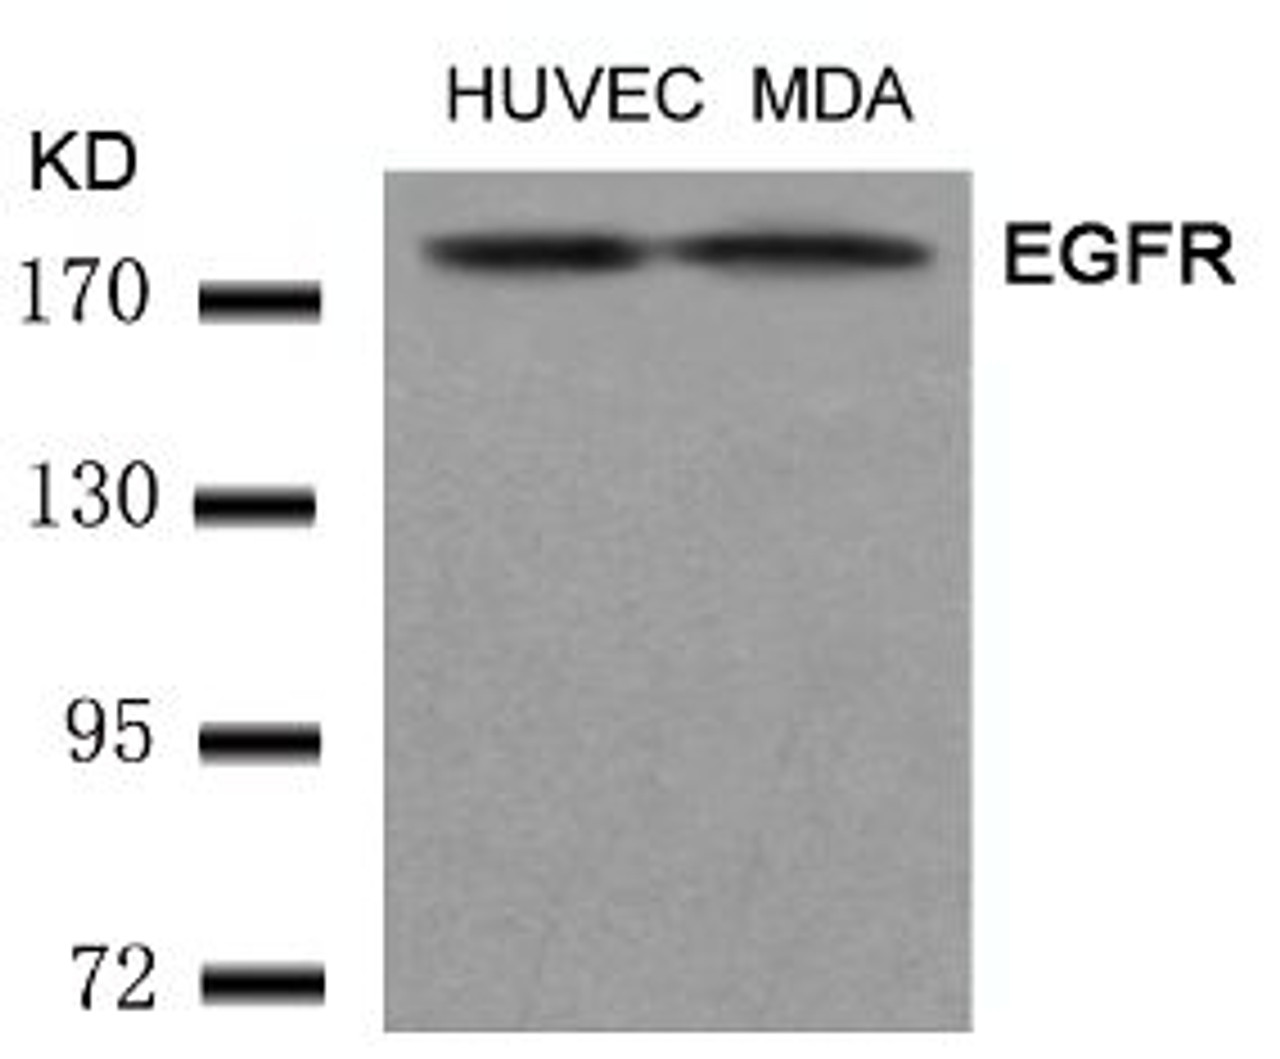 Western blot analysis of lysed extracts from HUVEC and MDA cells using EGFR (Ab-1197) .